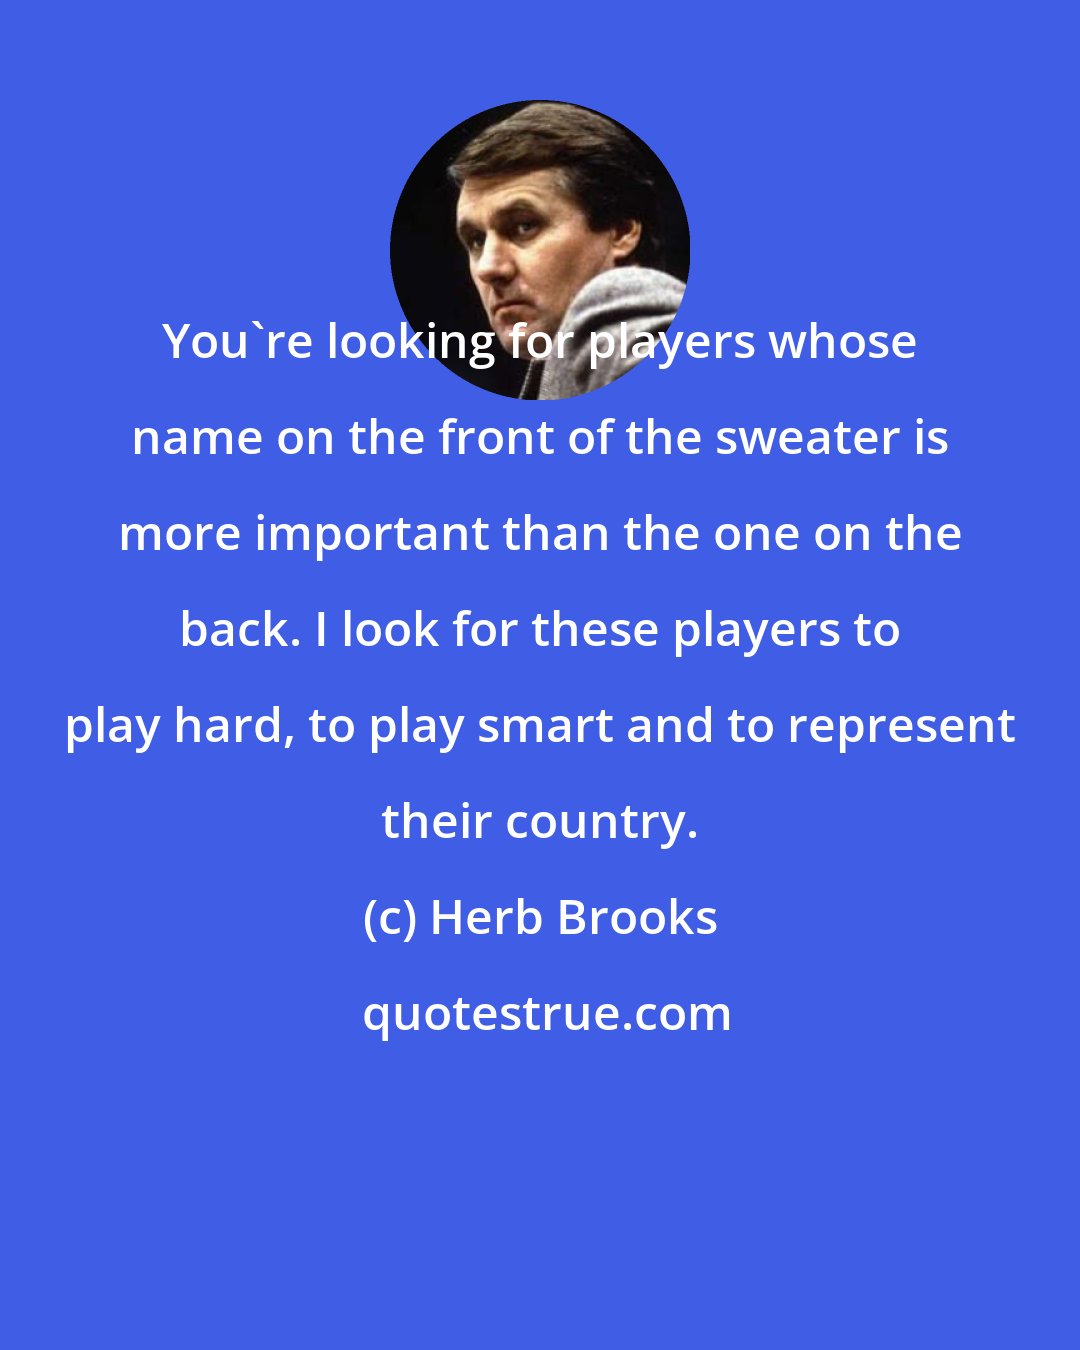 Herb Brooks: You're looking for players whose name on the front of the sweater is more important than the one on the back. I look for these players to play hard, to play smart and to represent their country.